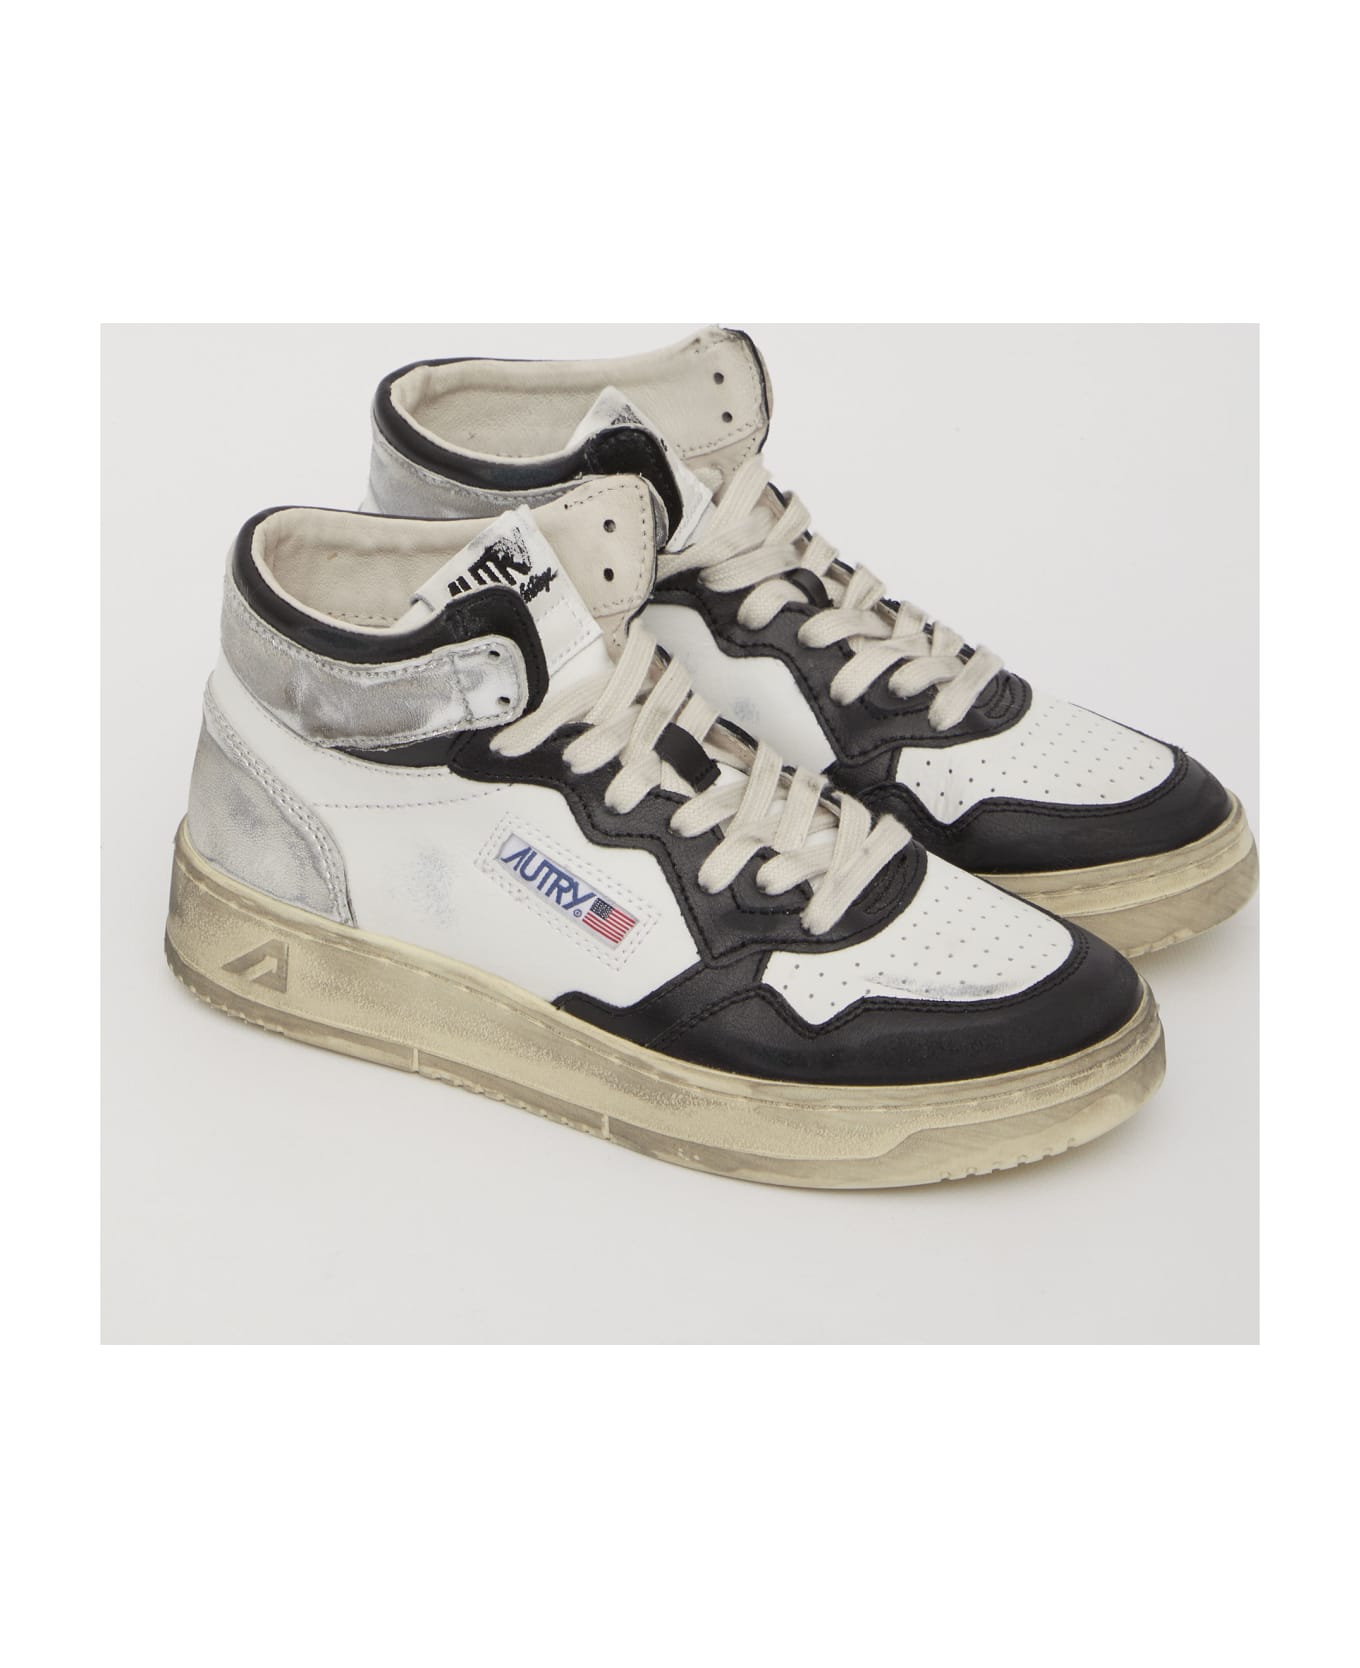 Autry Medalist Mid Super Vintage Sneakers - Leat White Black Silver スニーカー